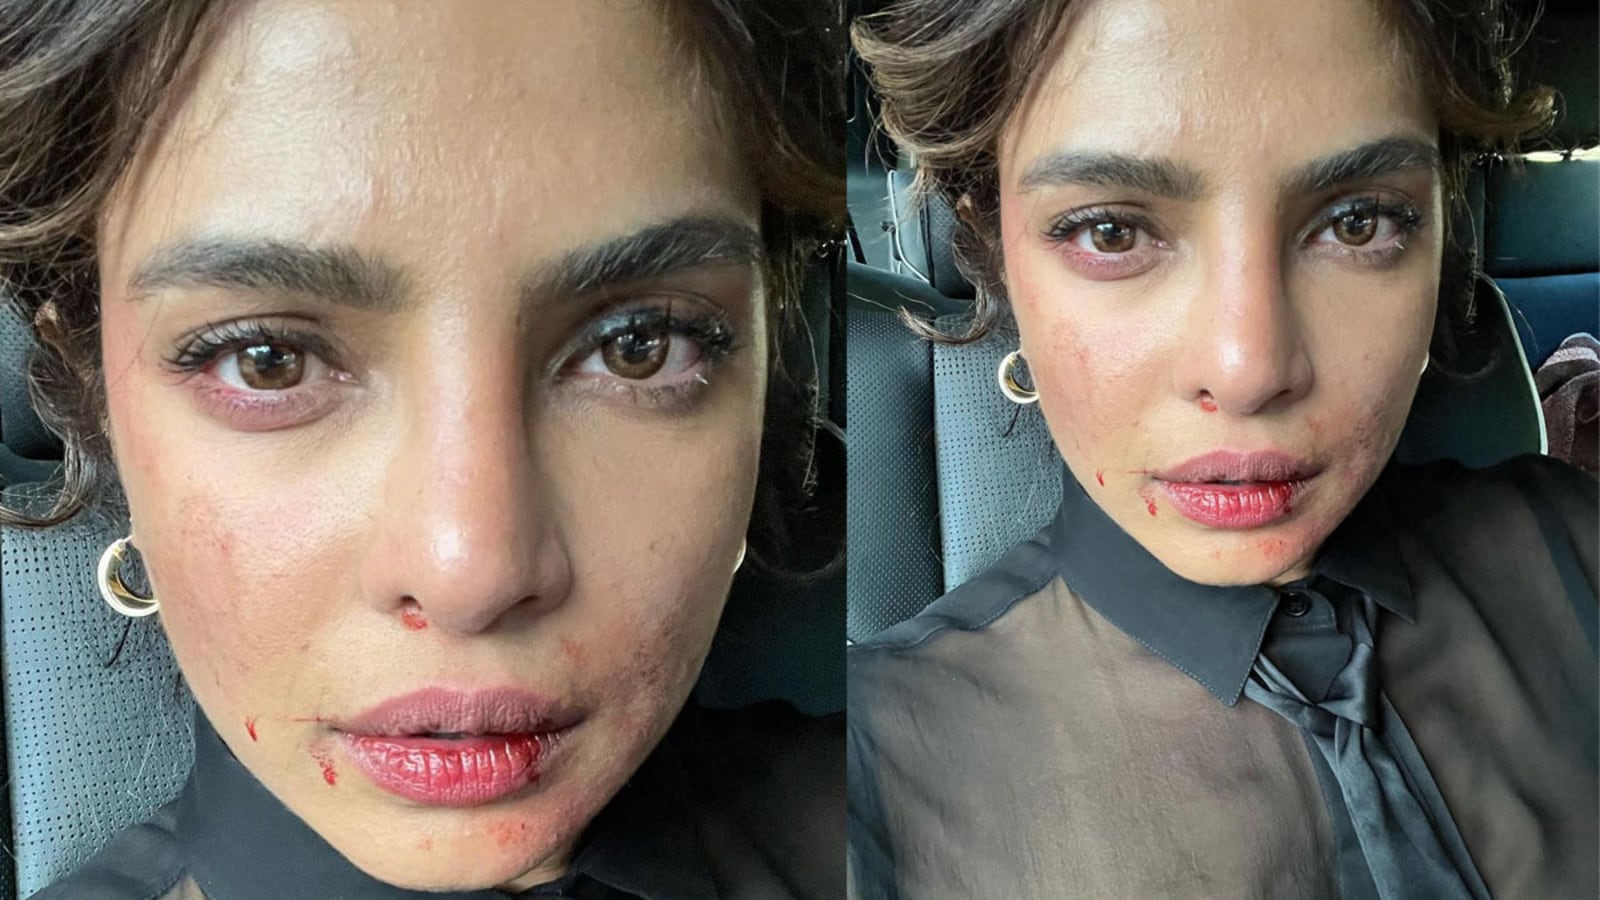 Priyanka Chopra shares pic of bruised face, leaves fans concerned